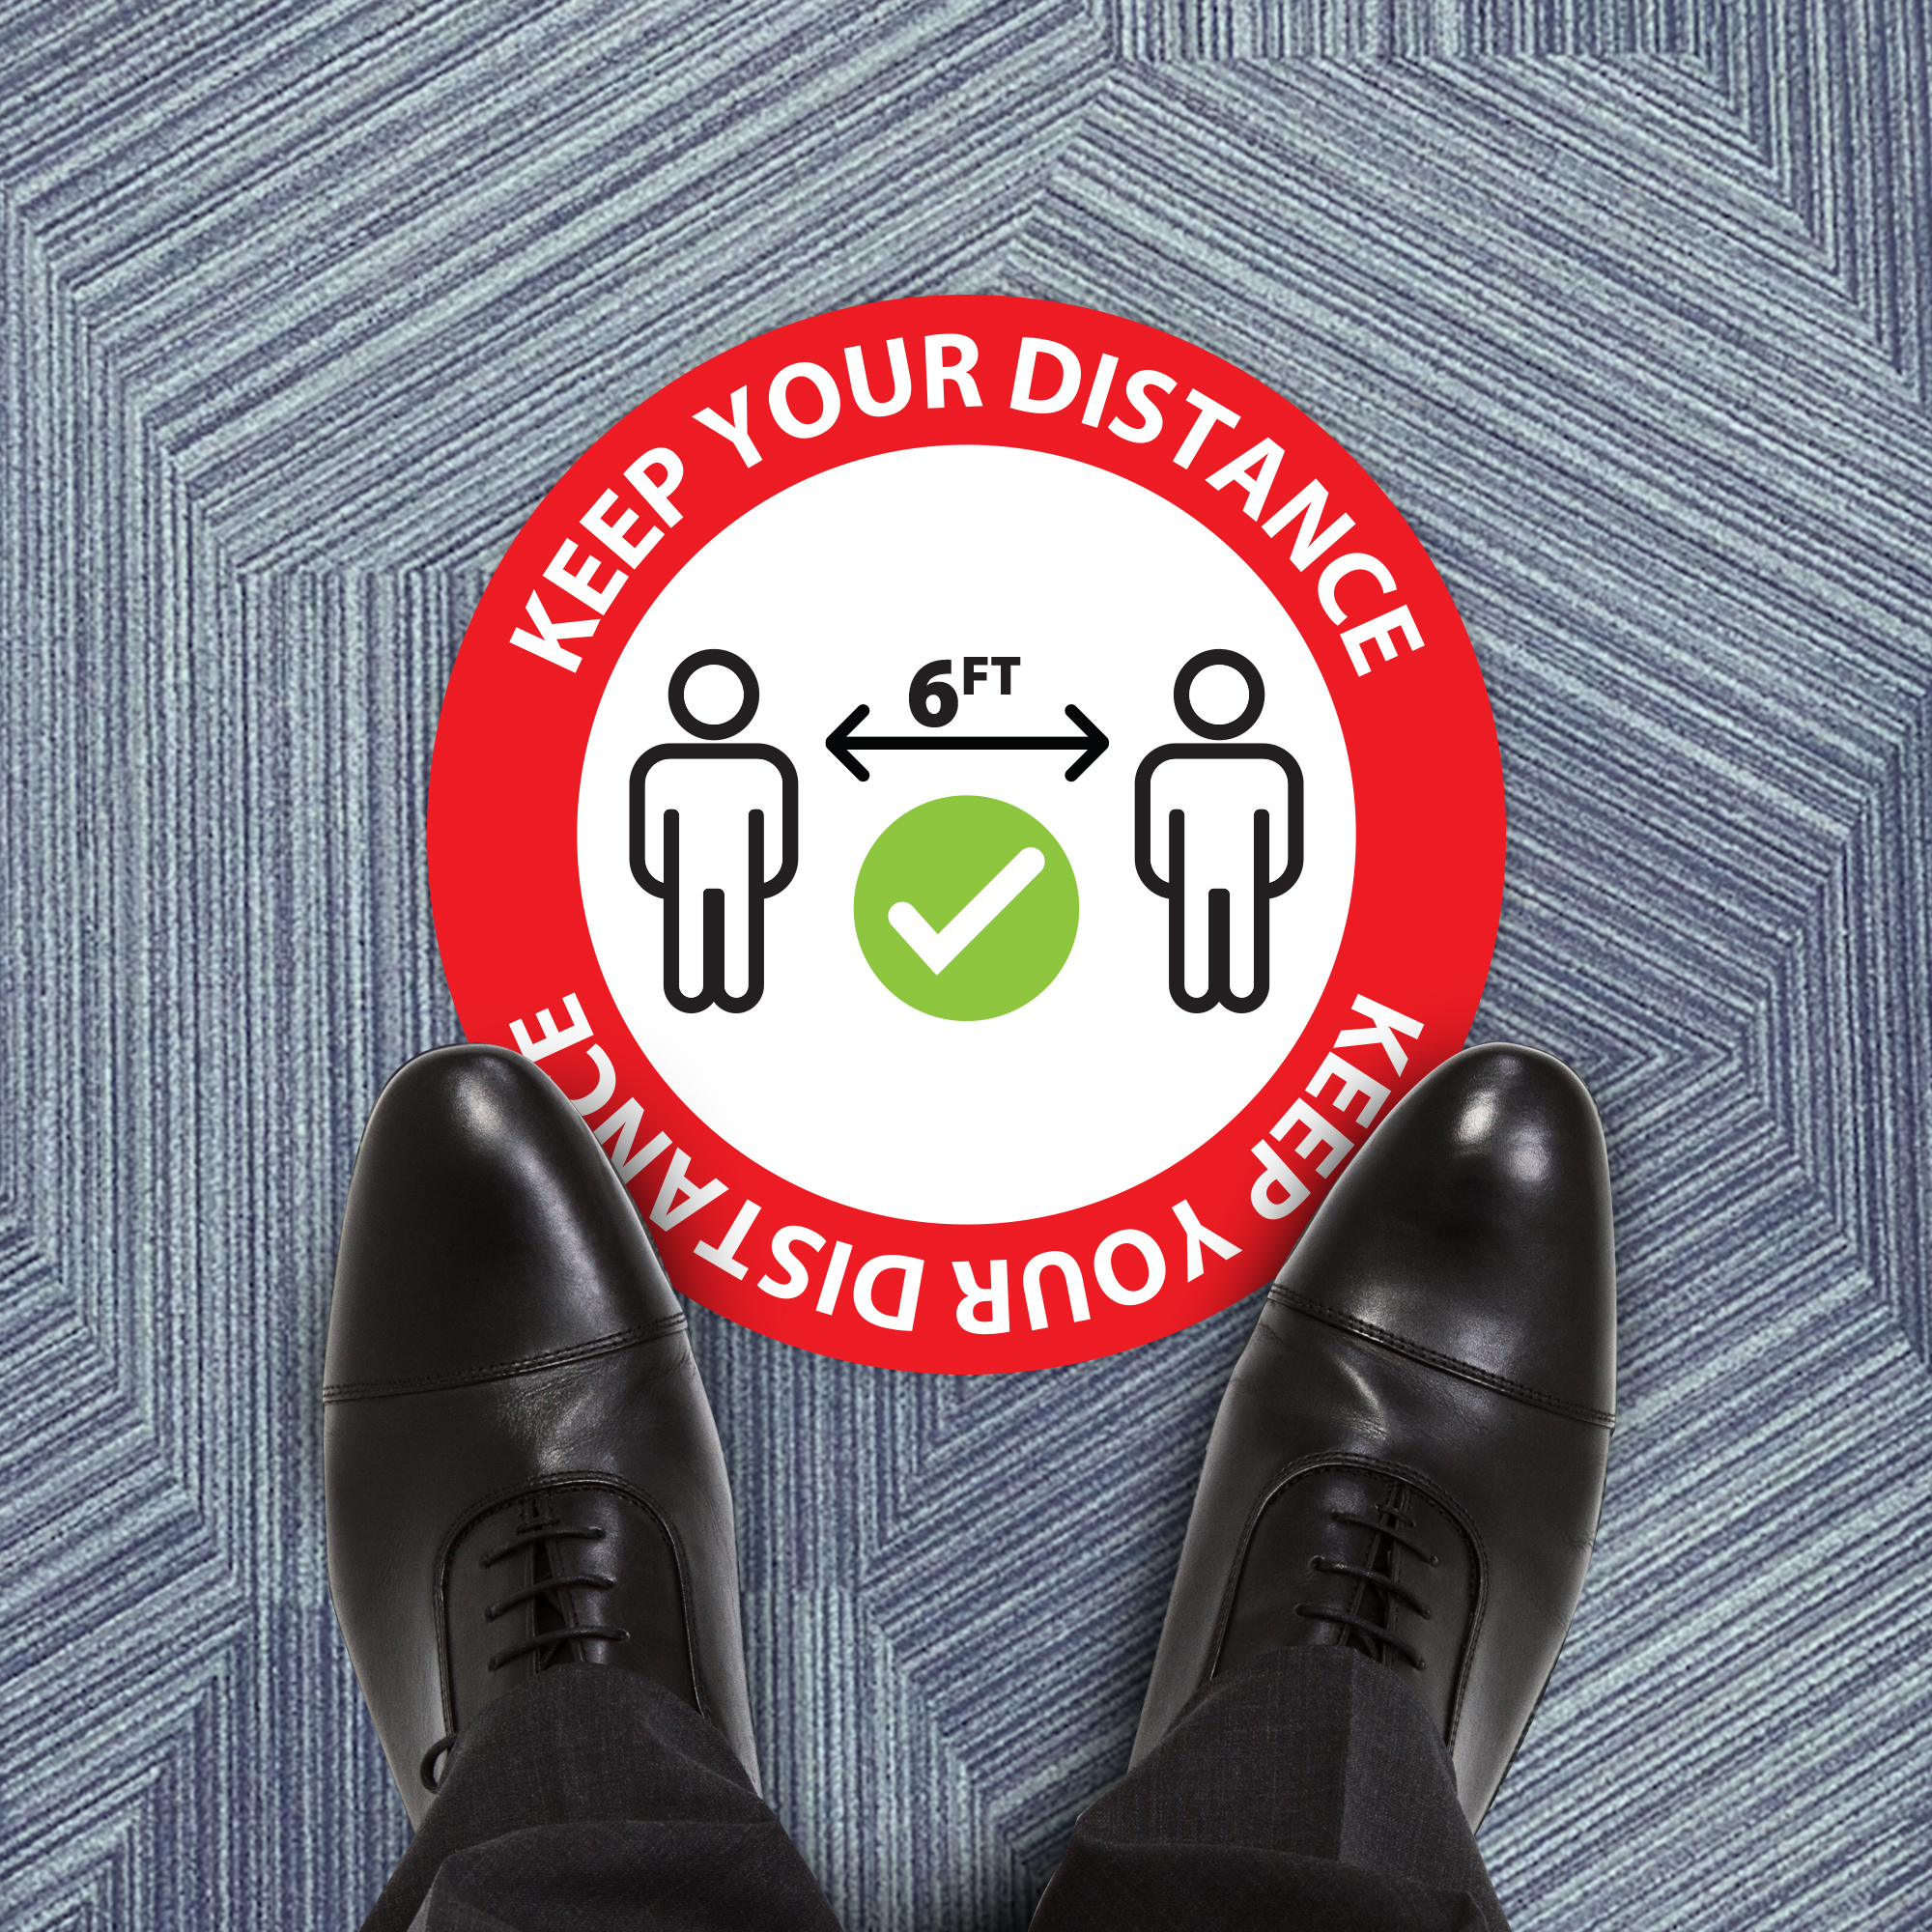 Keep Your Distance Floor Decal - 12 inch